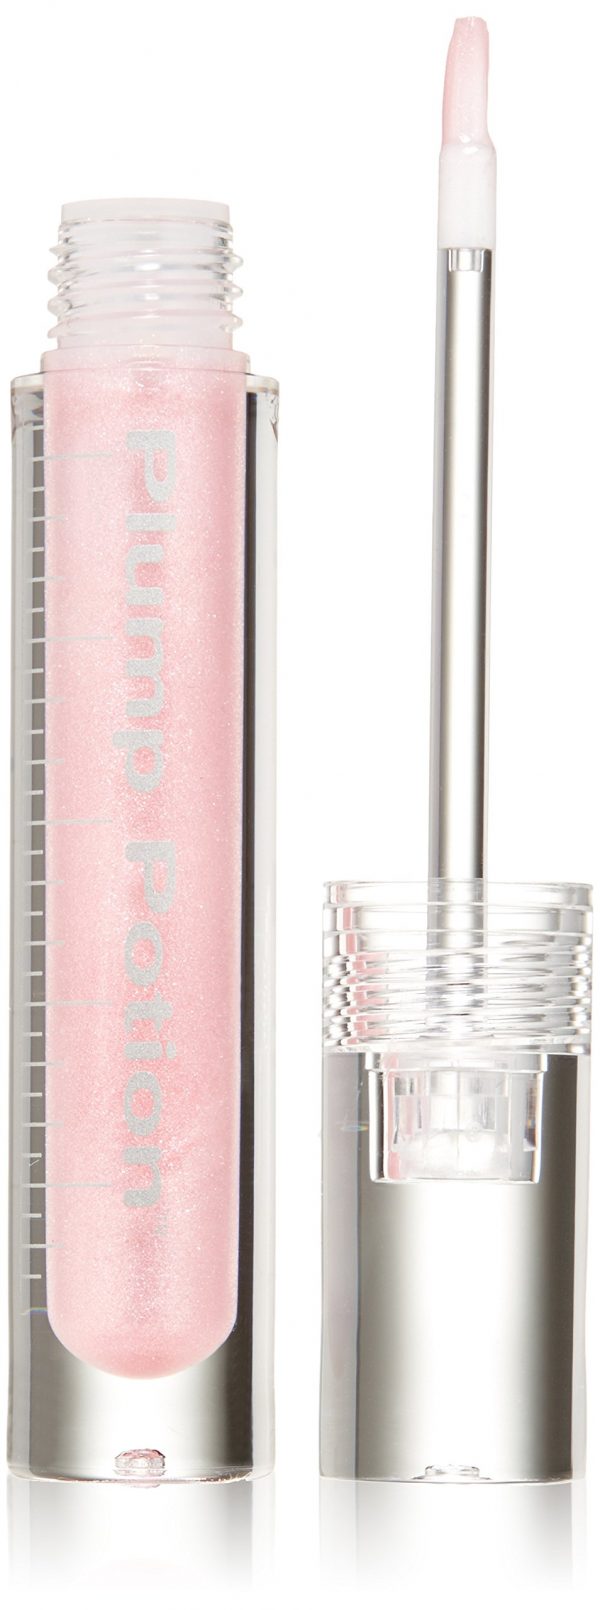 Physicians Formula Plump Potion Needle-Free Lip Plumping Cocktail Shade Extension, Pink Crystal Potion - 0.1 Ounce